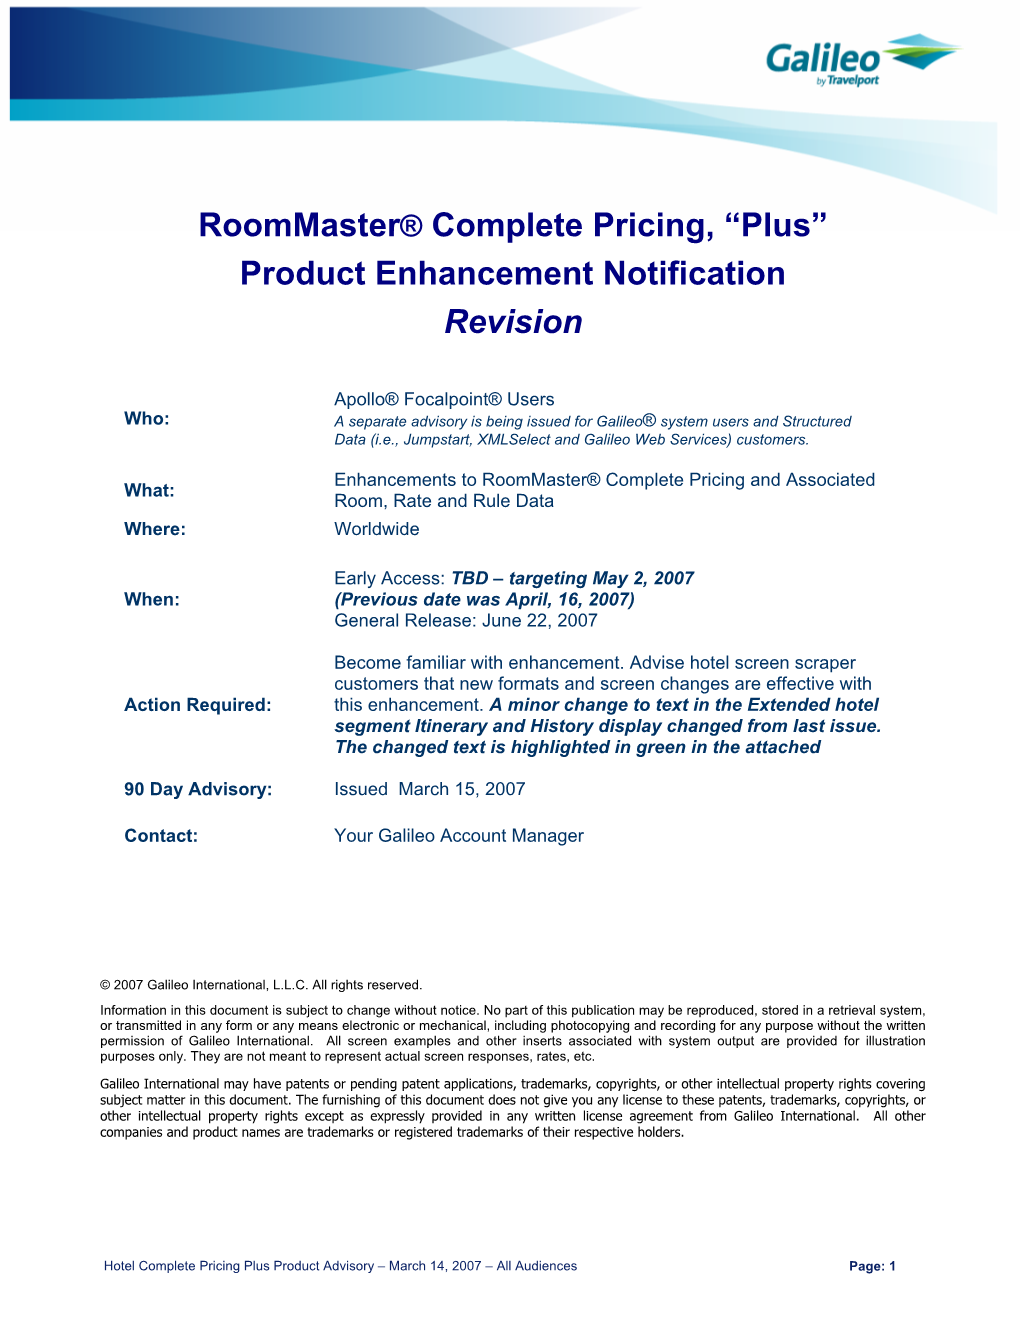 Roommaster® Complete Pricing, “Plus” Product Enhancement Notification Revision